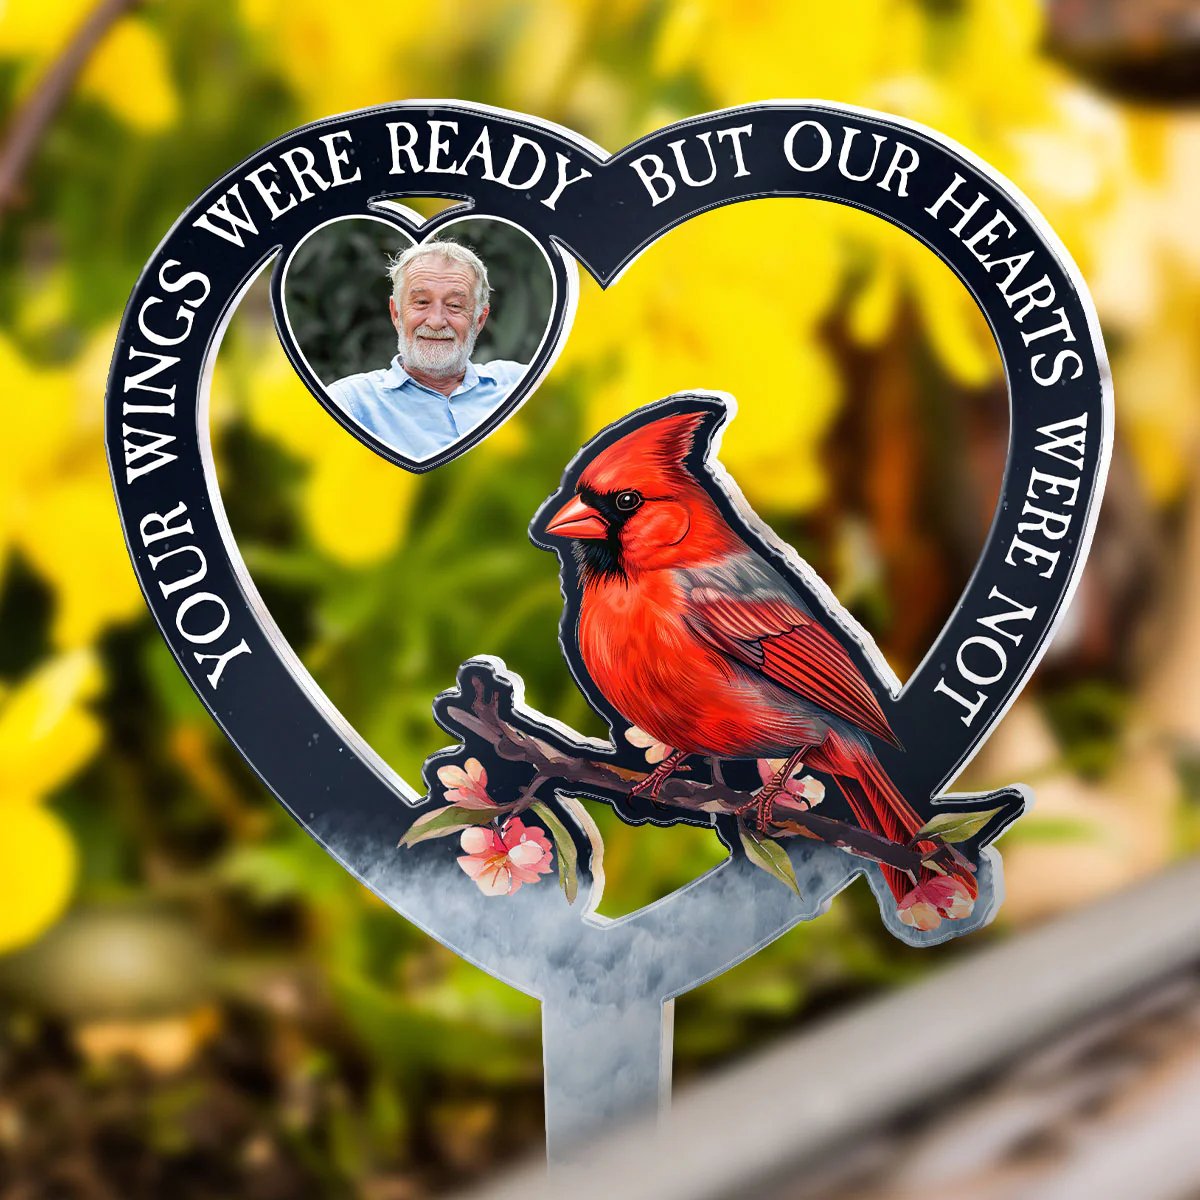 Family - Your Wings Were Ready But Our Hearts Were Not - Personalized Garden Stake (HL) - The Next Custom Gift